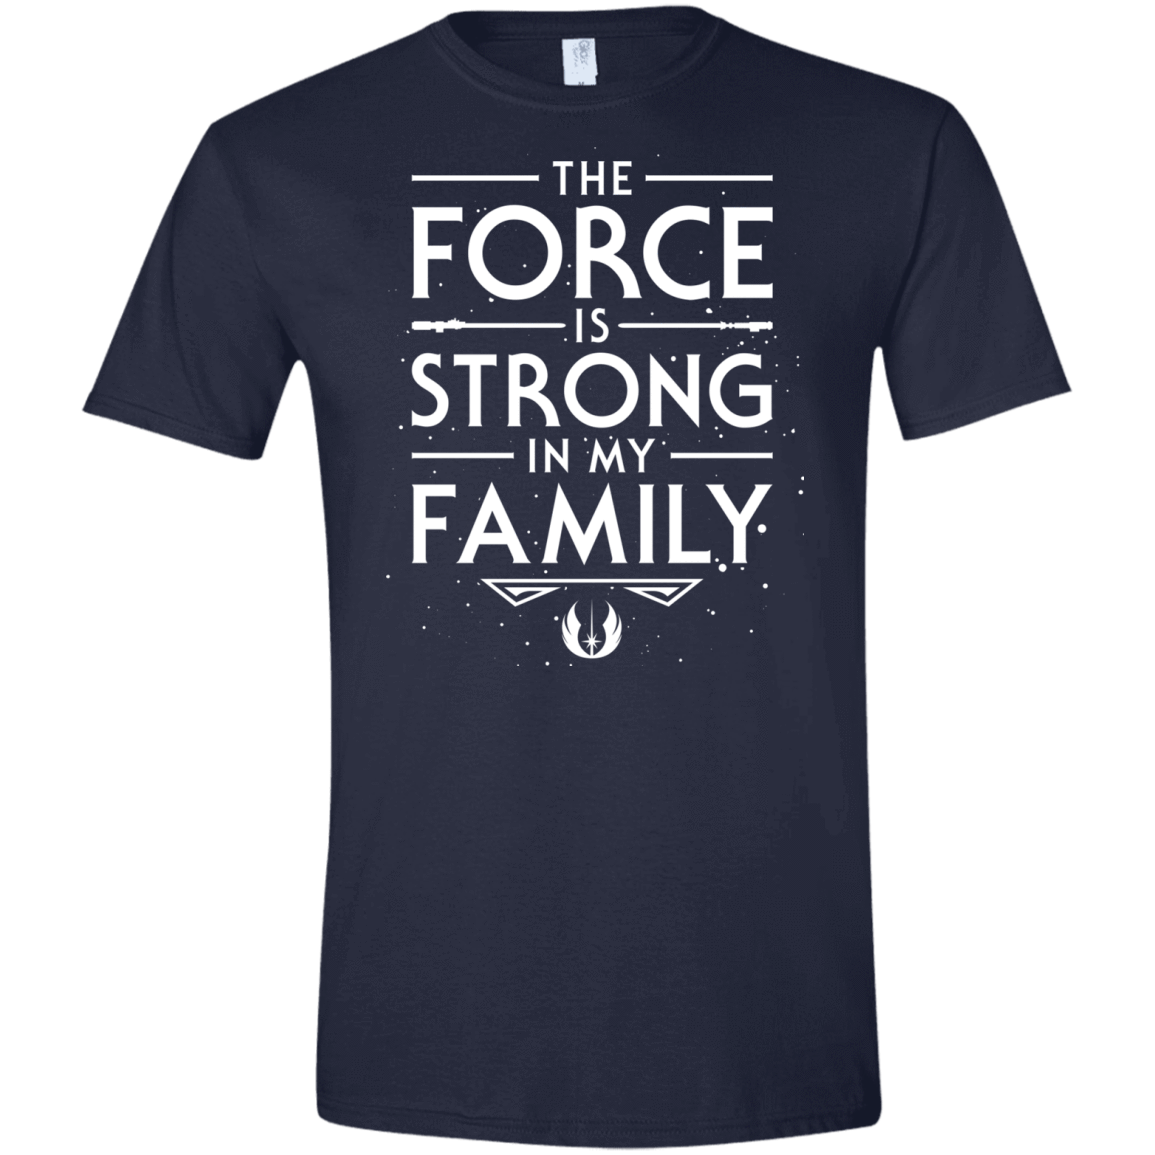 T-Shirts Navy / X-Small The Force is Strong in my Family Men's Semi-Fitted Softstyle